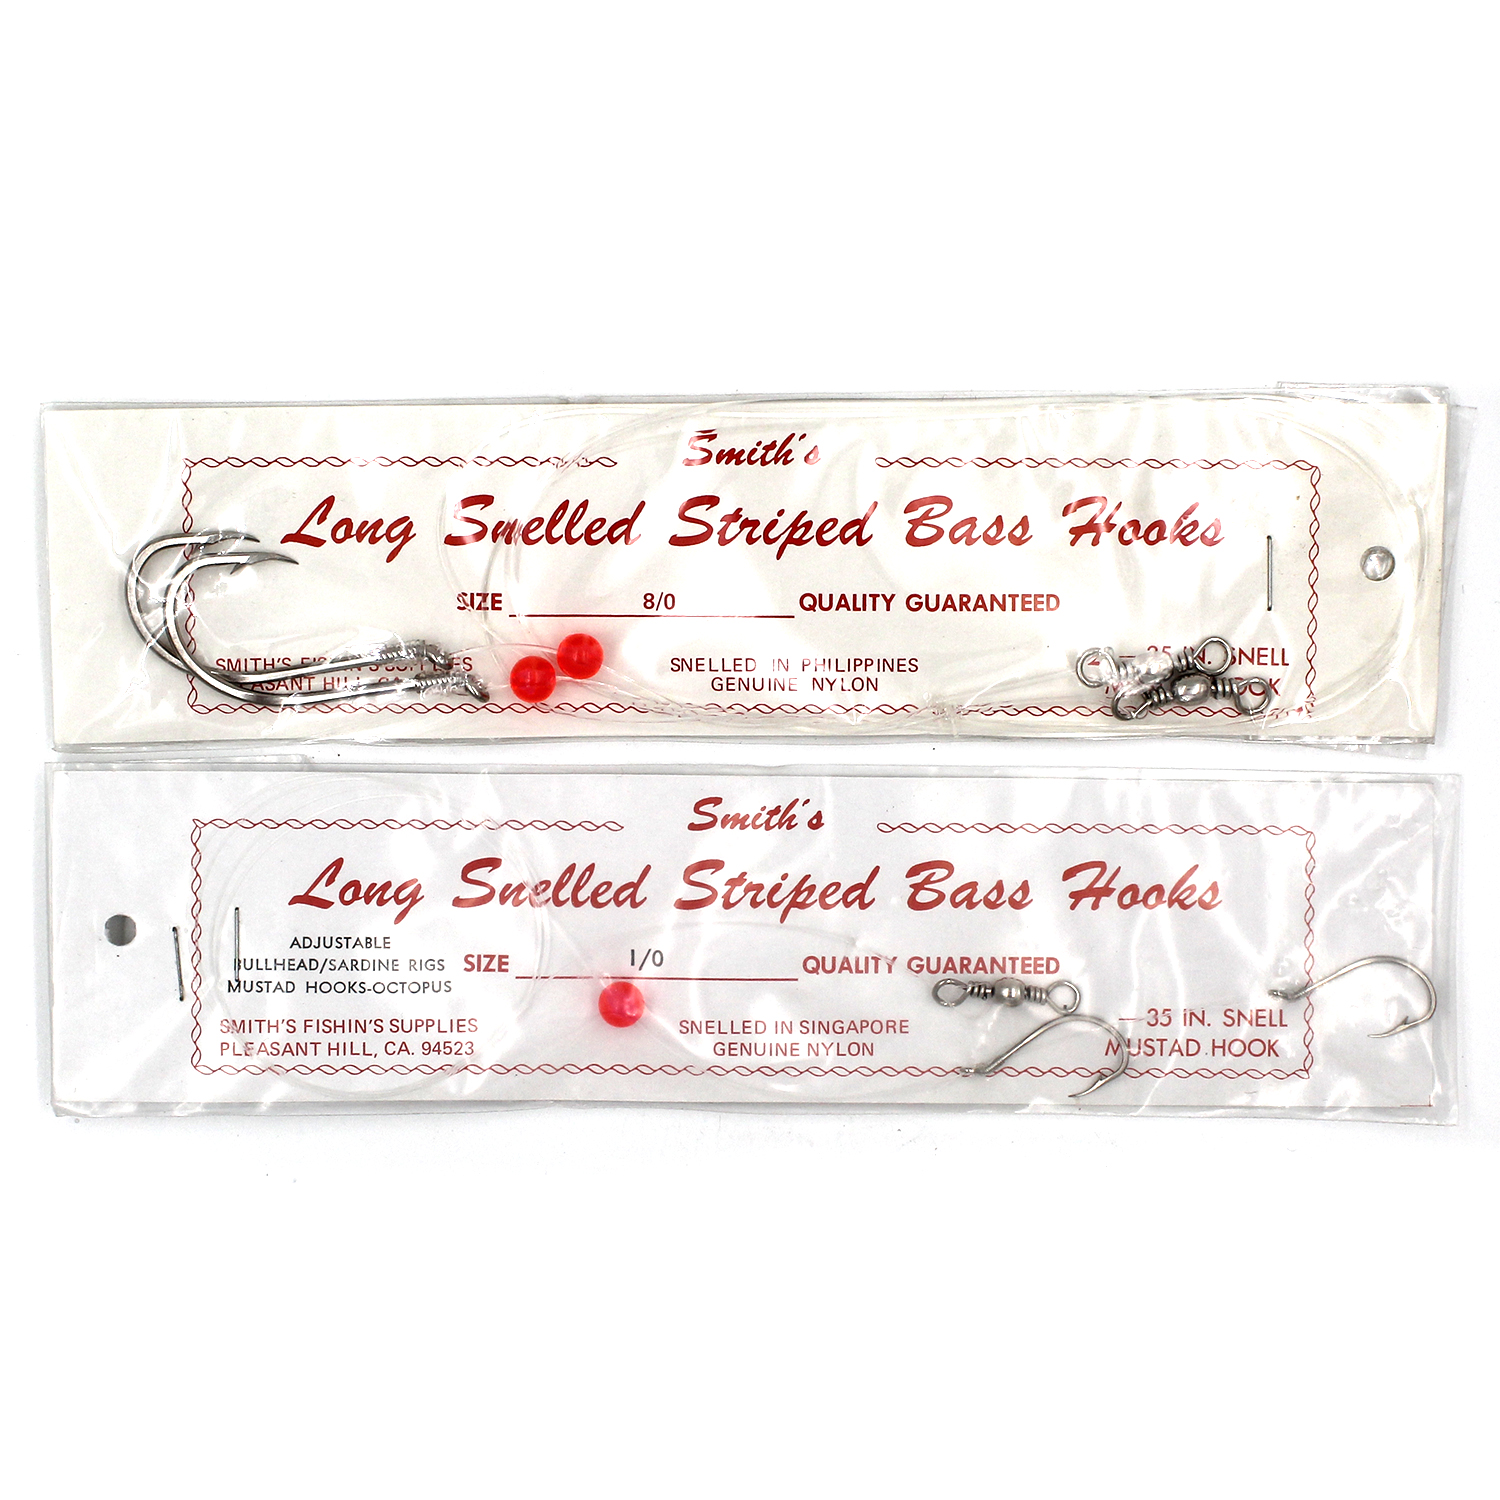 Smith's Long Snelled Striped Bass Rigged Hooks SLBS-2/0